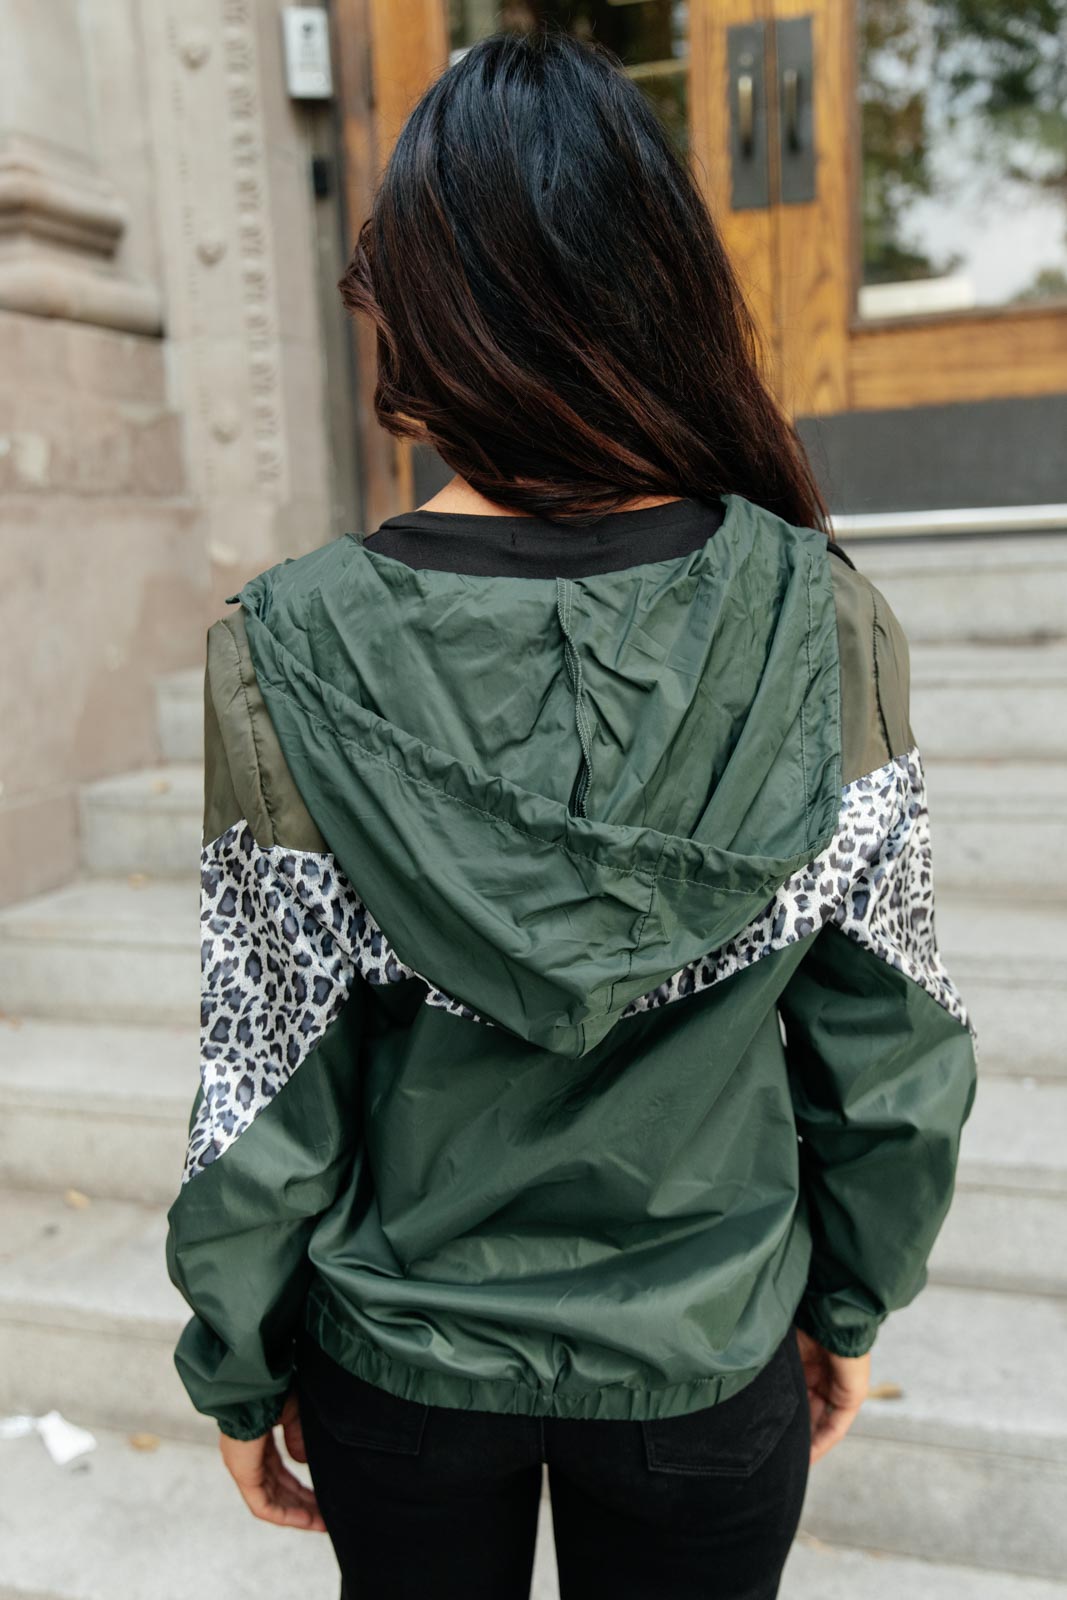 Make Your Move Windbreaker in Olive - Reflection Boutique